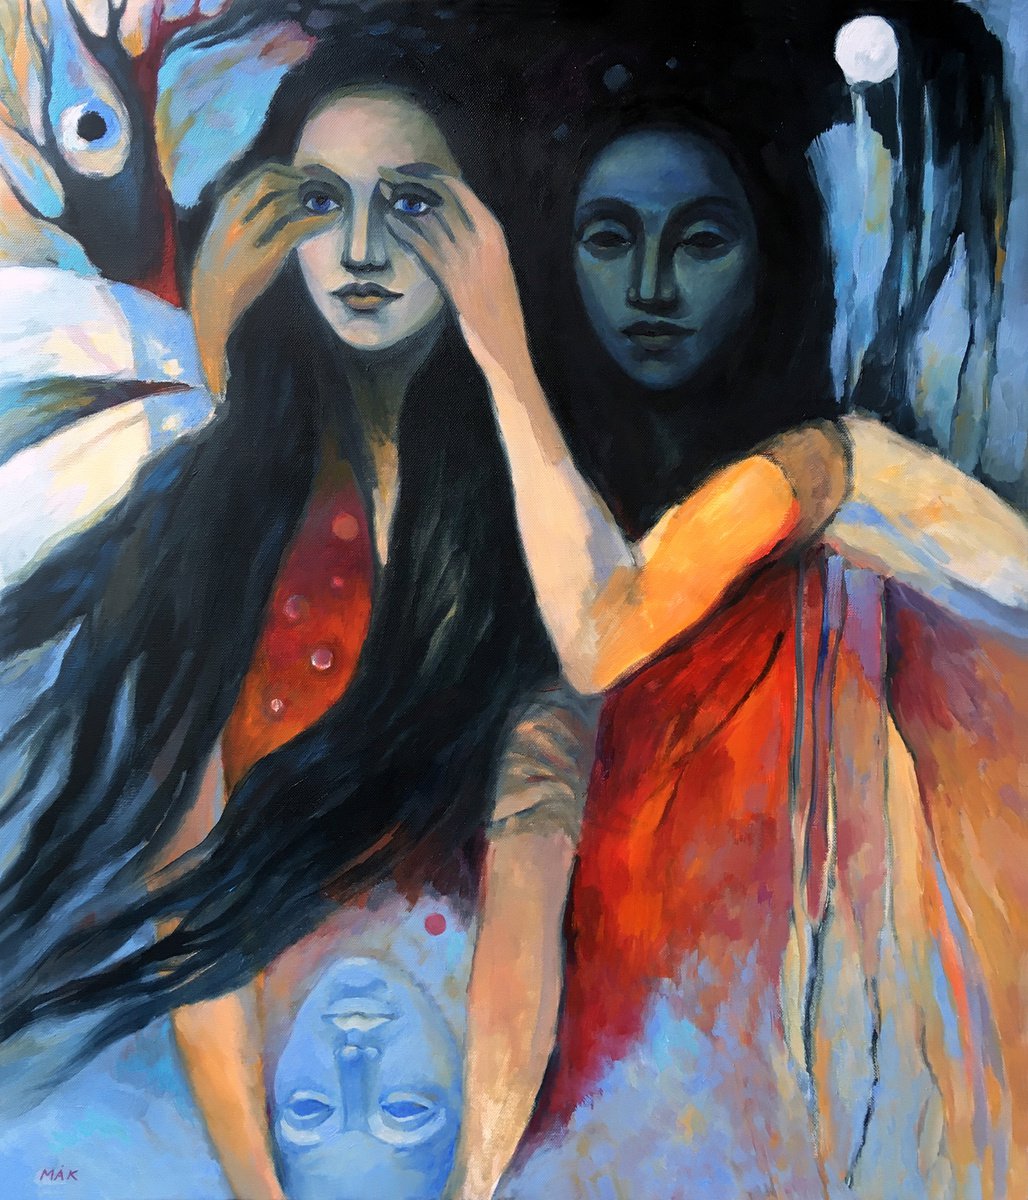 BURDENED WITH LIGHT - surreal figurative artwork with women and masks in blue, red and ind... by Irene Makarova